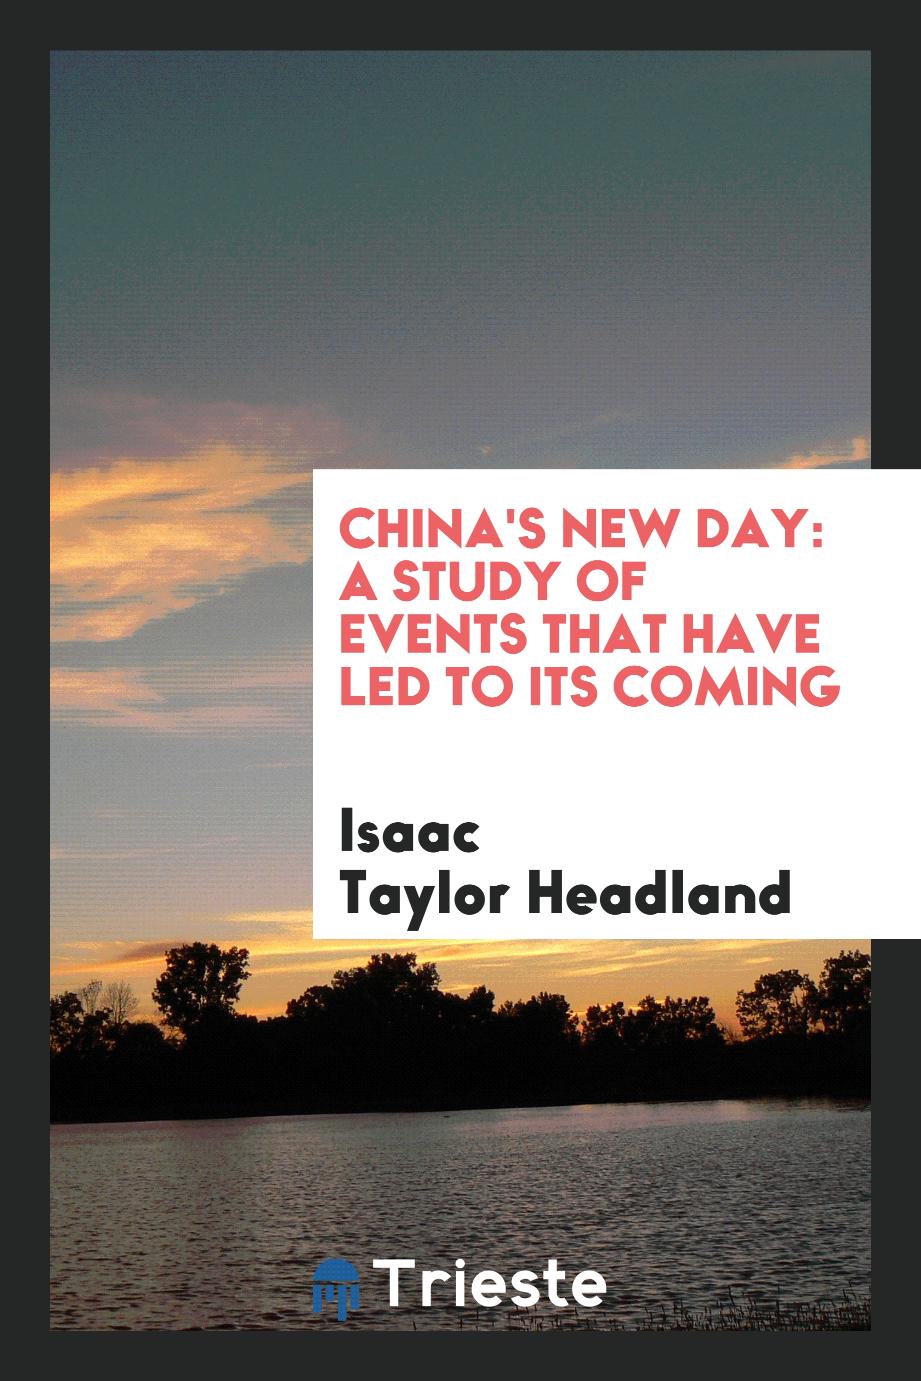 China's New Day: A Study of Events that Have Led to Its Coming